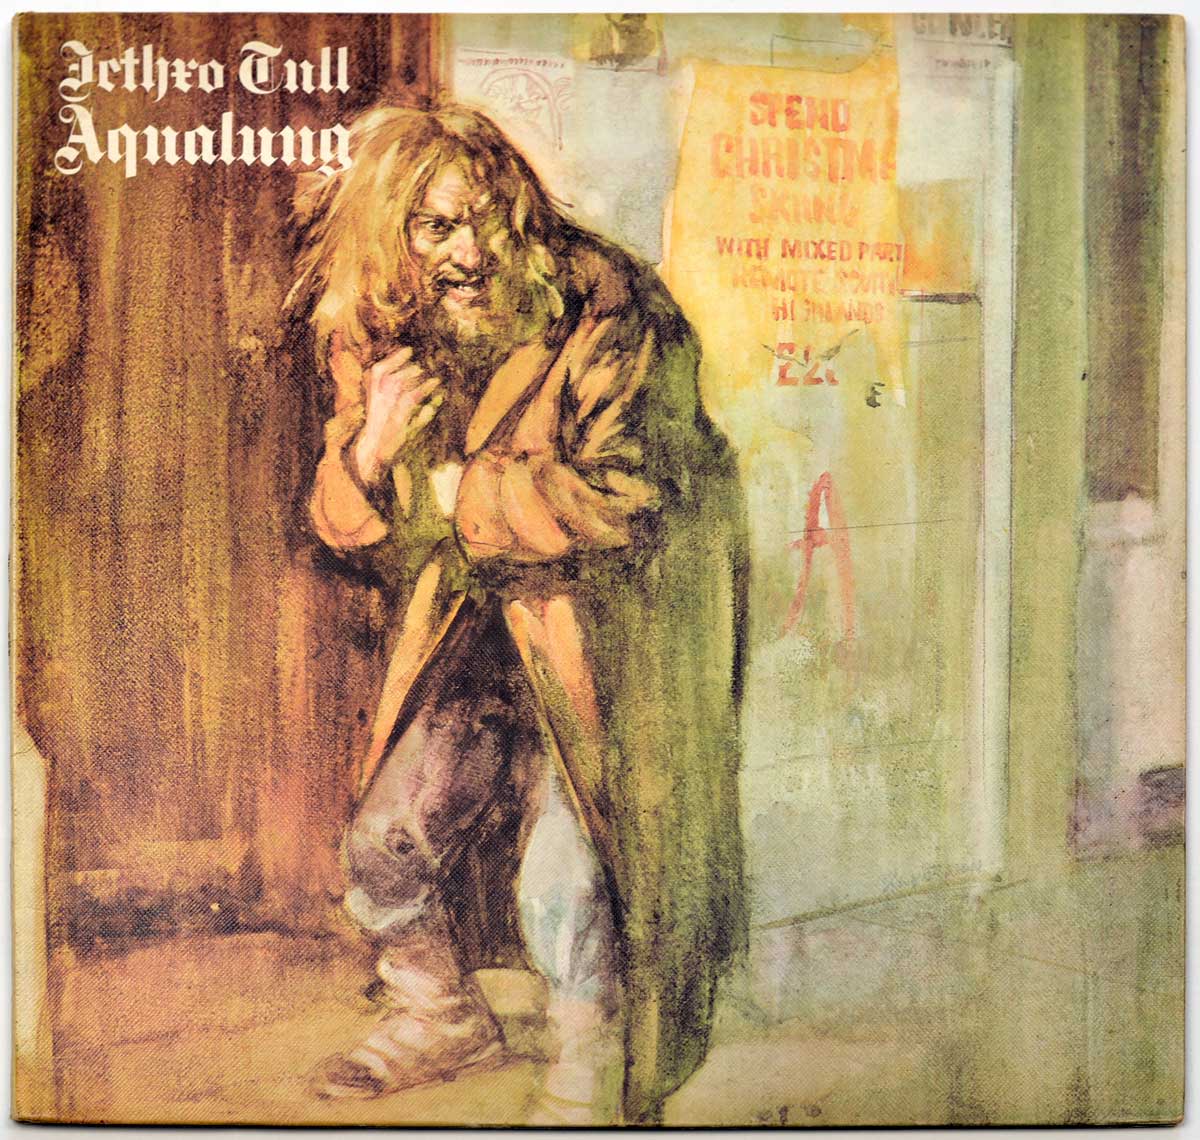 Album Front Cover of the French release of Aqualung by Jethro Tull.